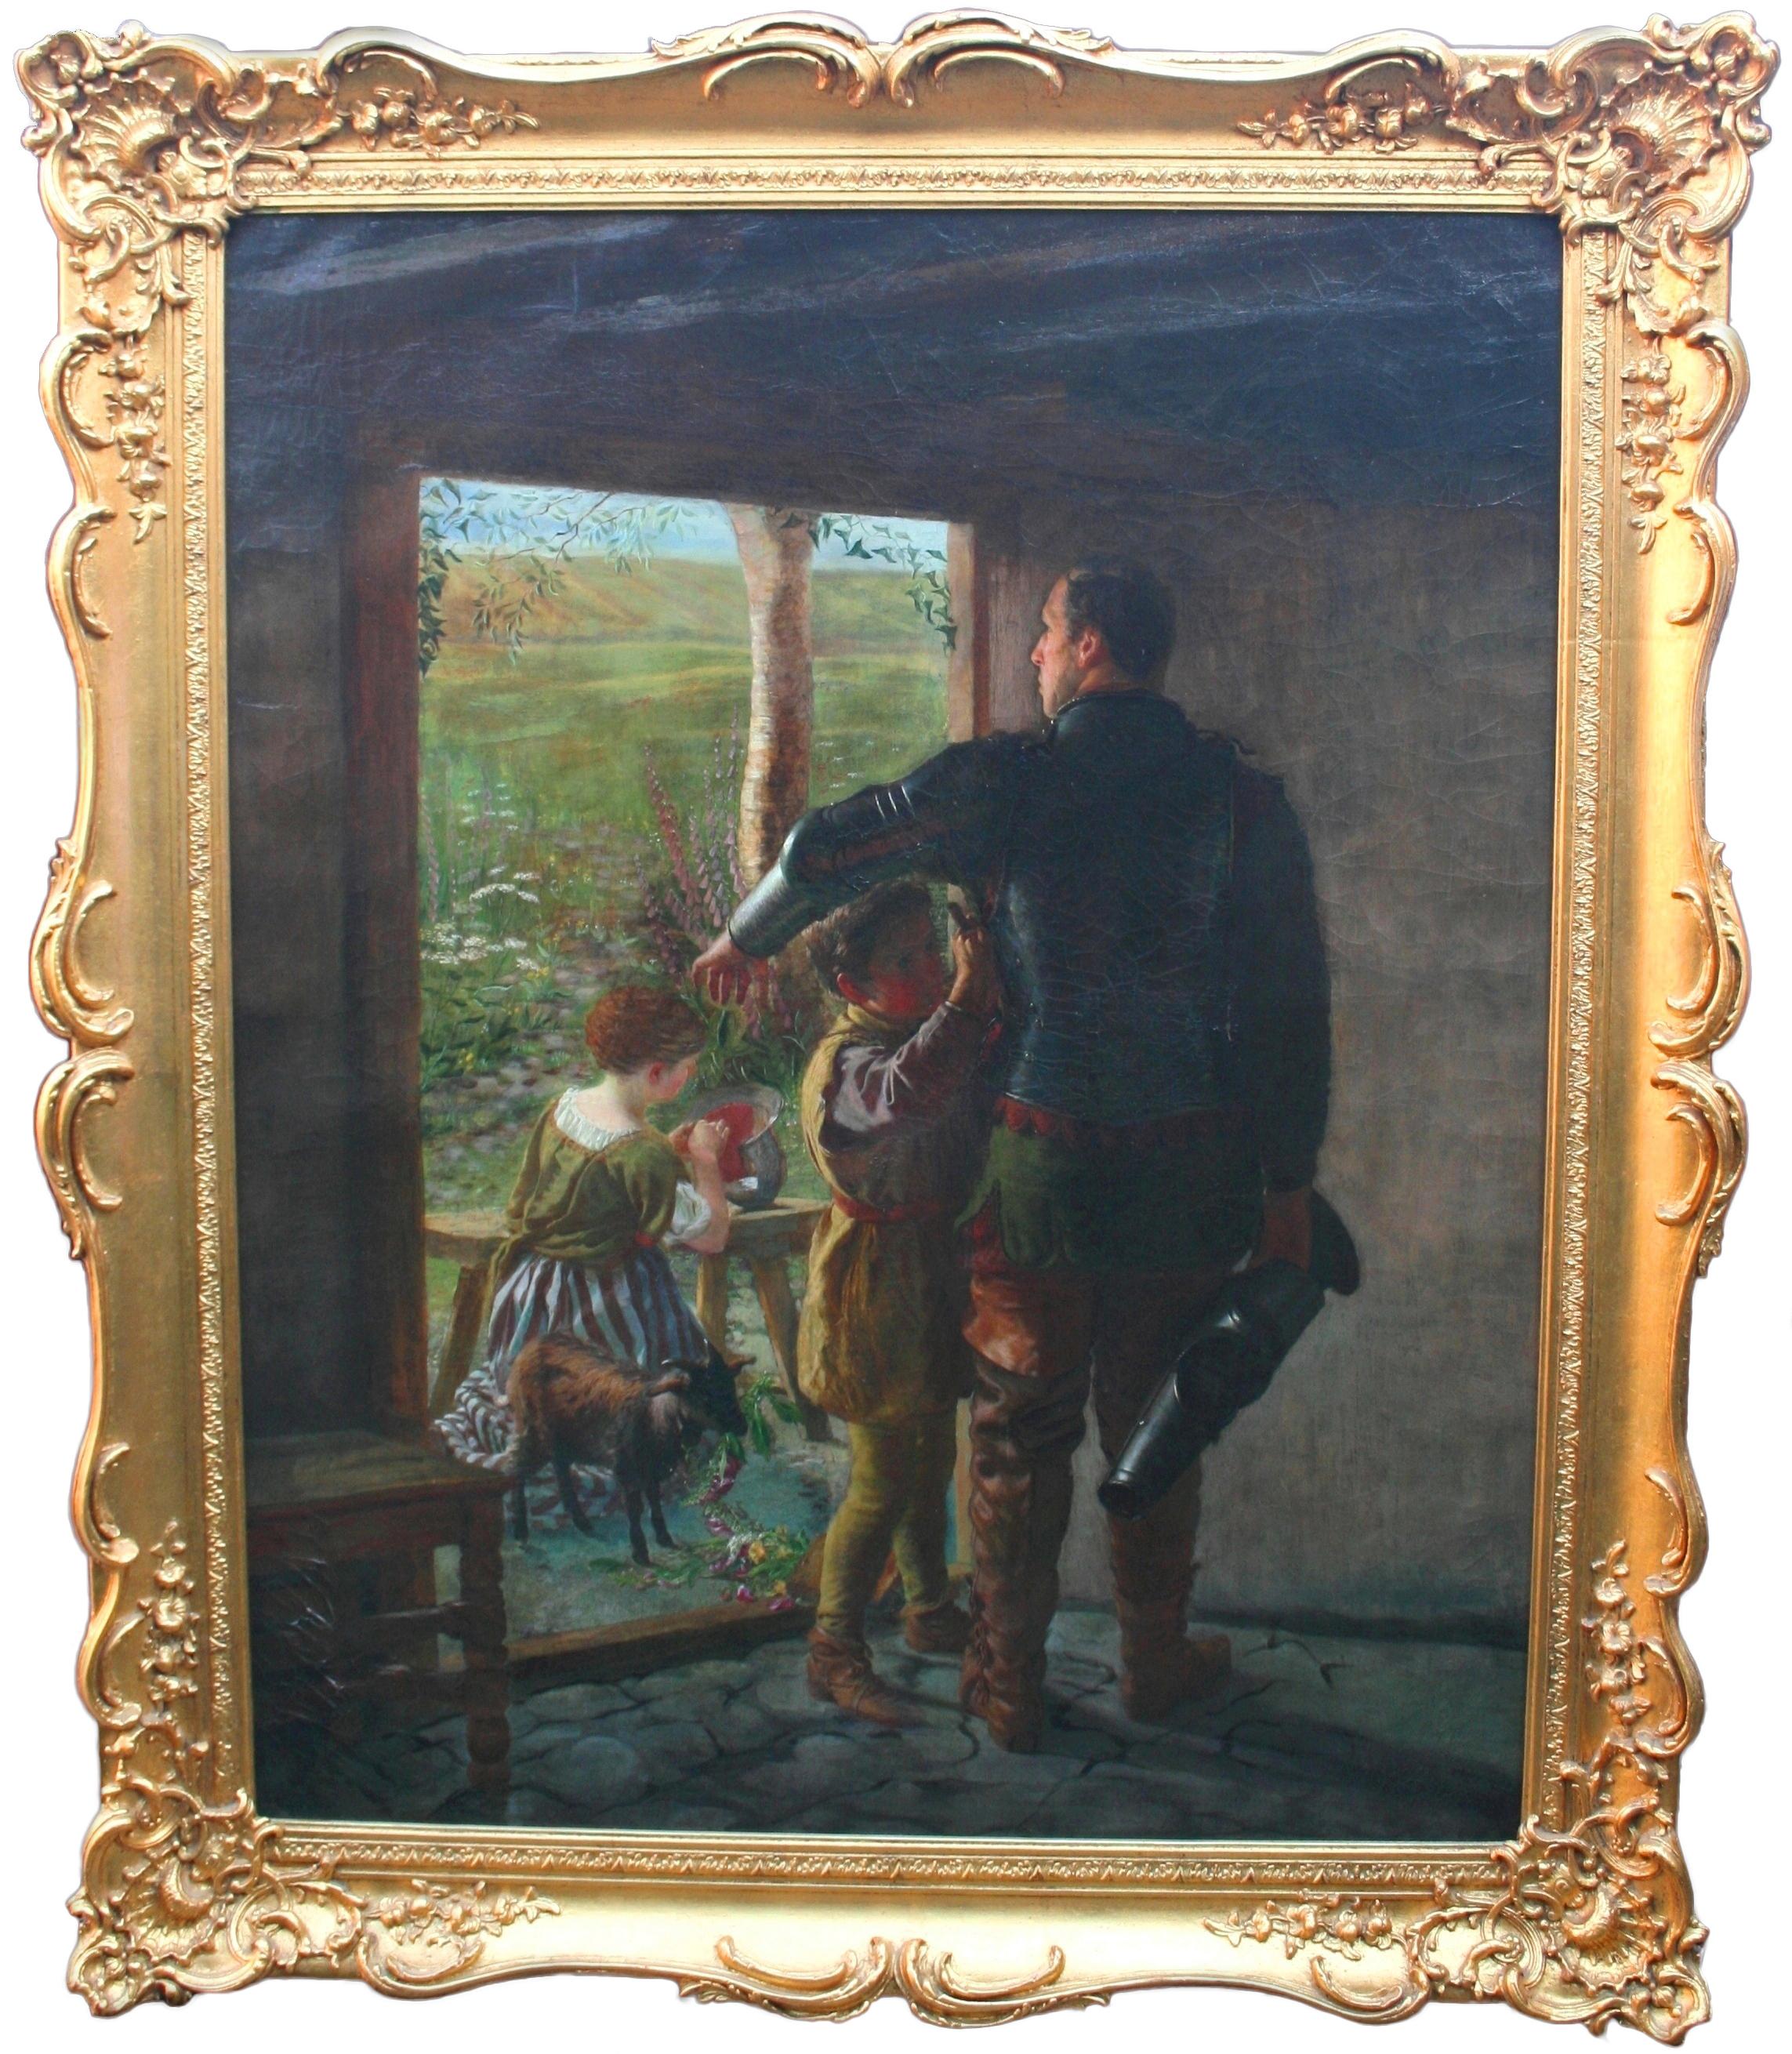 'A Call to Arms' fine pre Raphaelite painting oil on canvas


Title 'A Call to Duty'

Medium oil on canvas

Frame 127 x 149 cm / 50 x 58 1/2 in

Period Pre Raphaelite, 19th c.

Signed Unsigned

Frame Set in heavy commensurate gilt